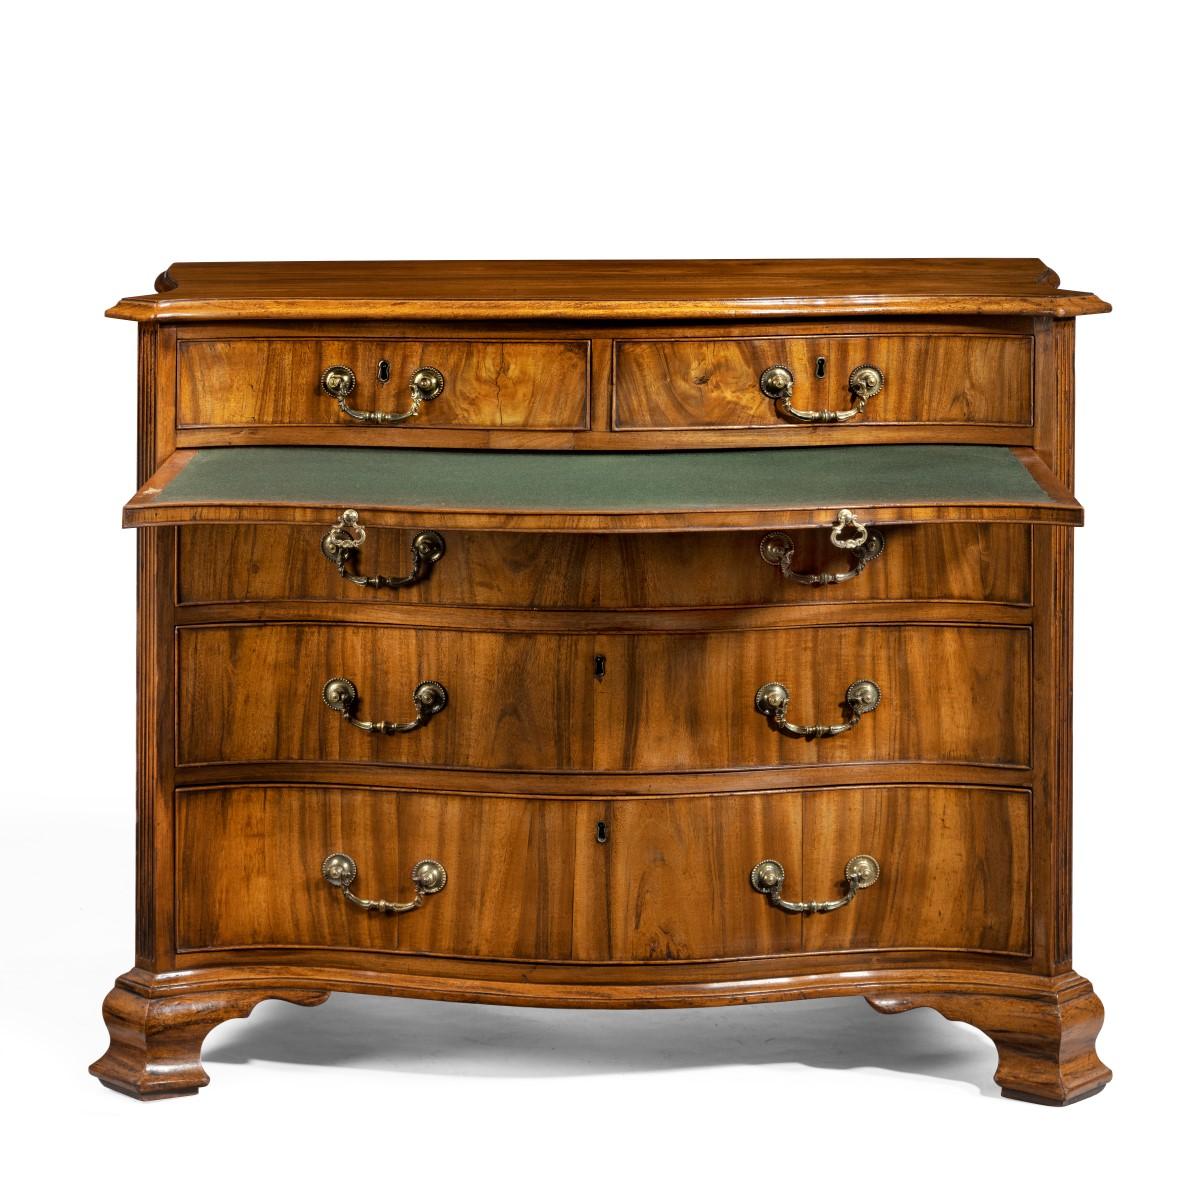 Late 18th Century Striking George III Serpentine Chest of Drawers